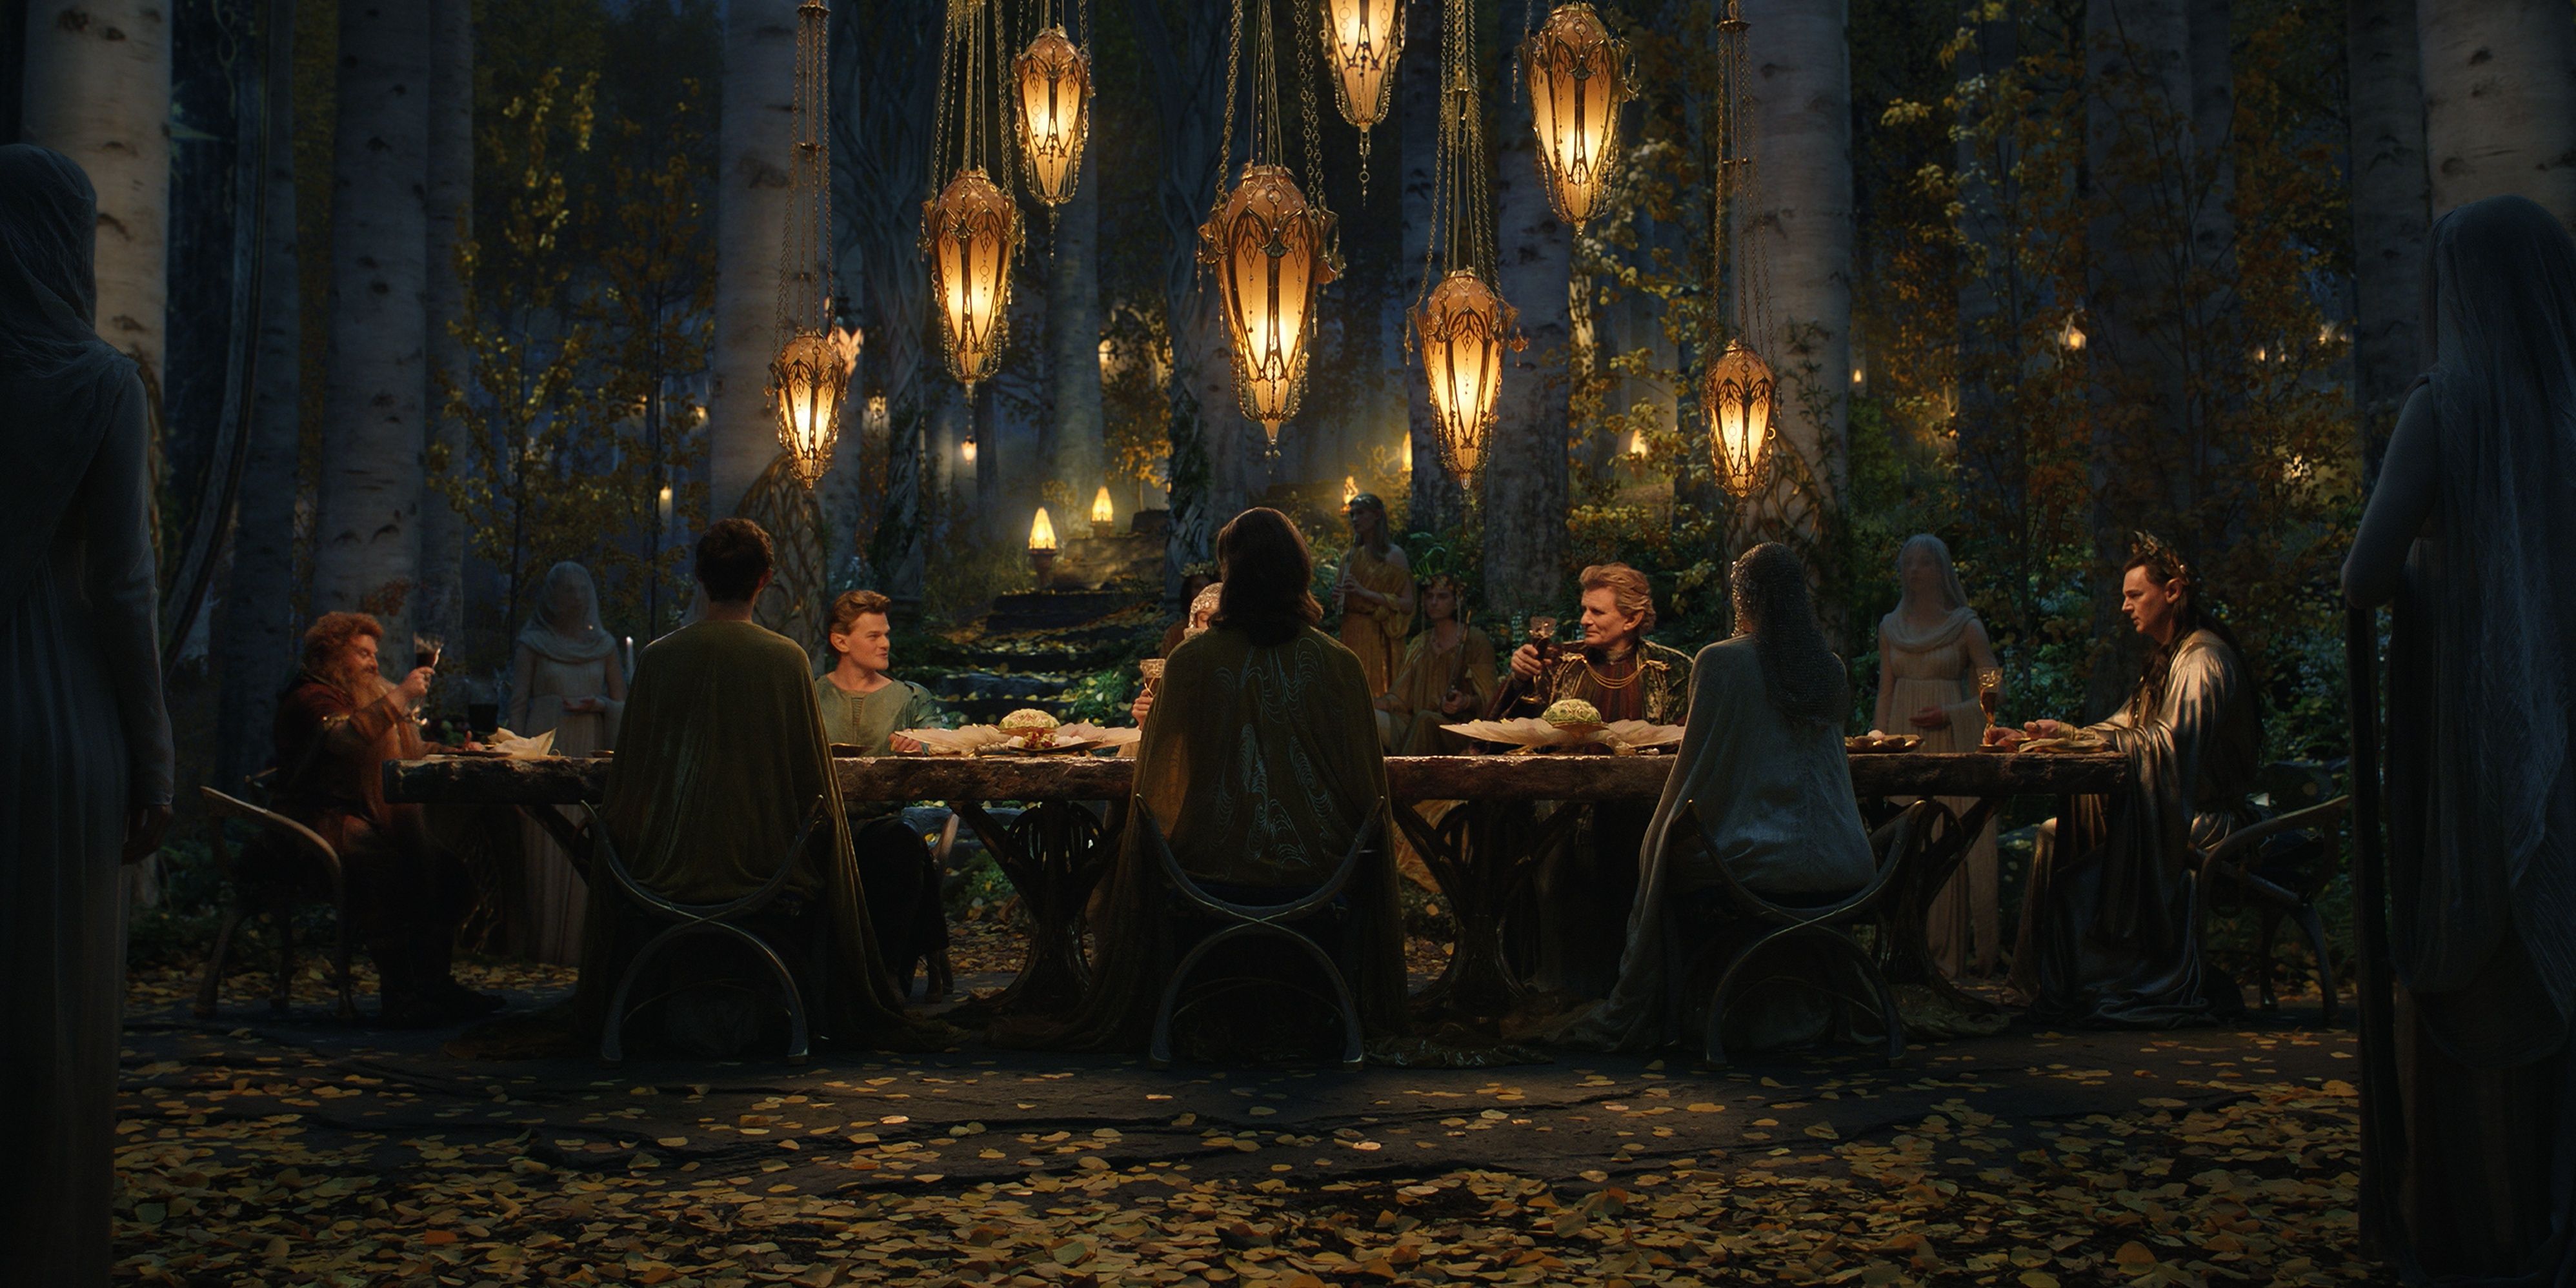 The High Elves eat at the dinner table